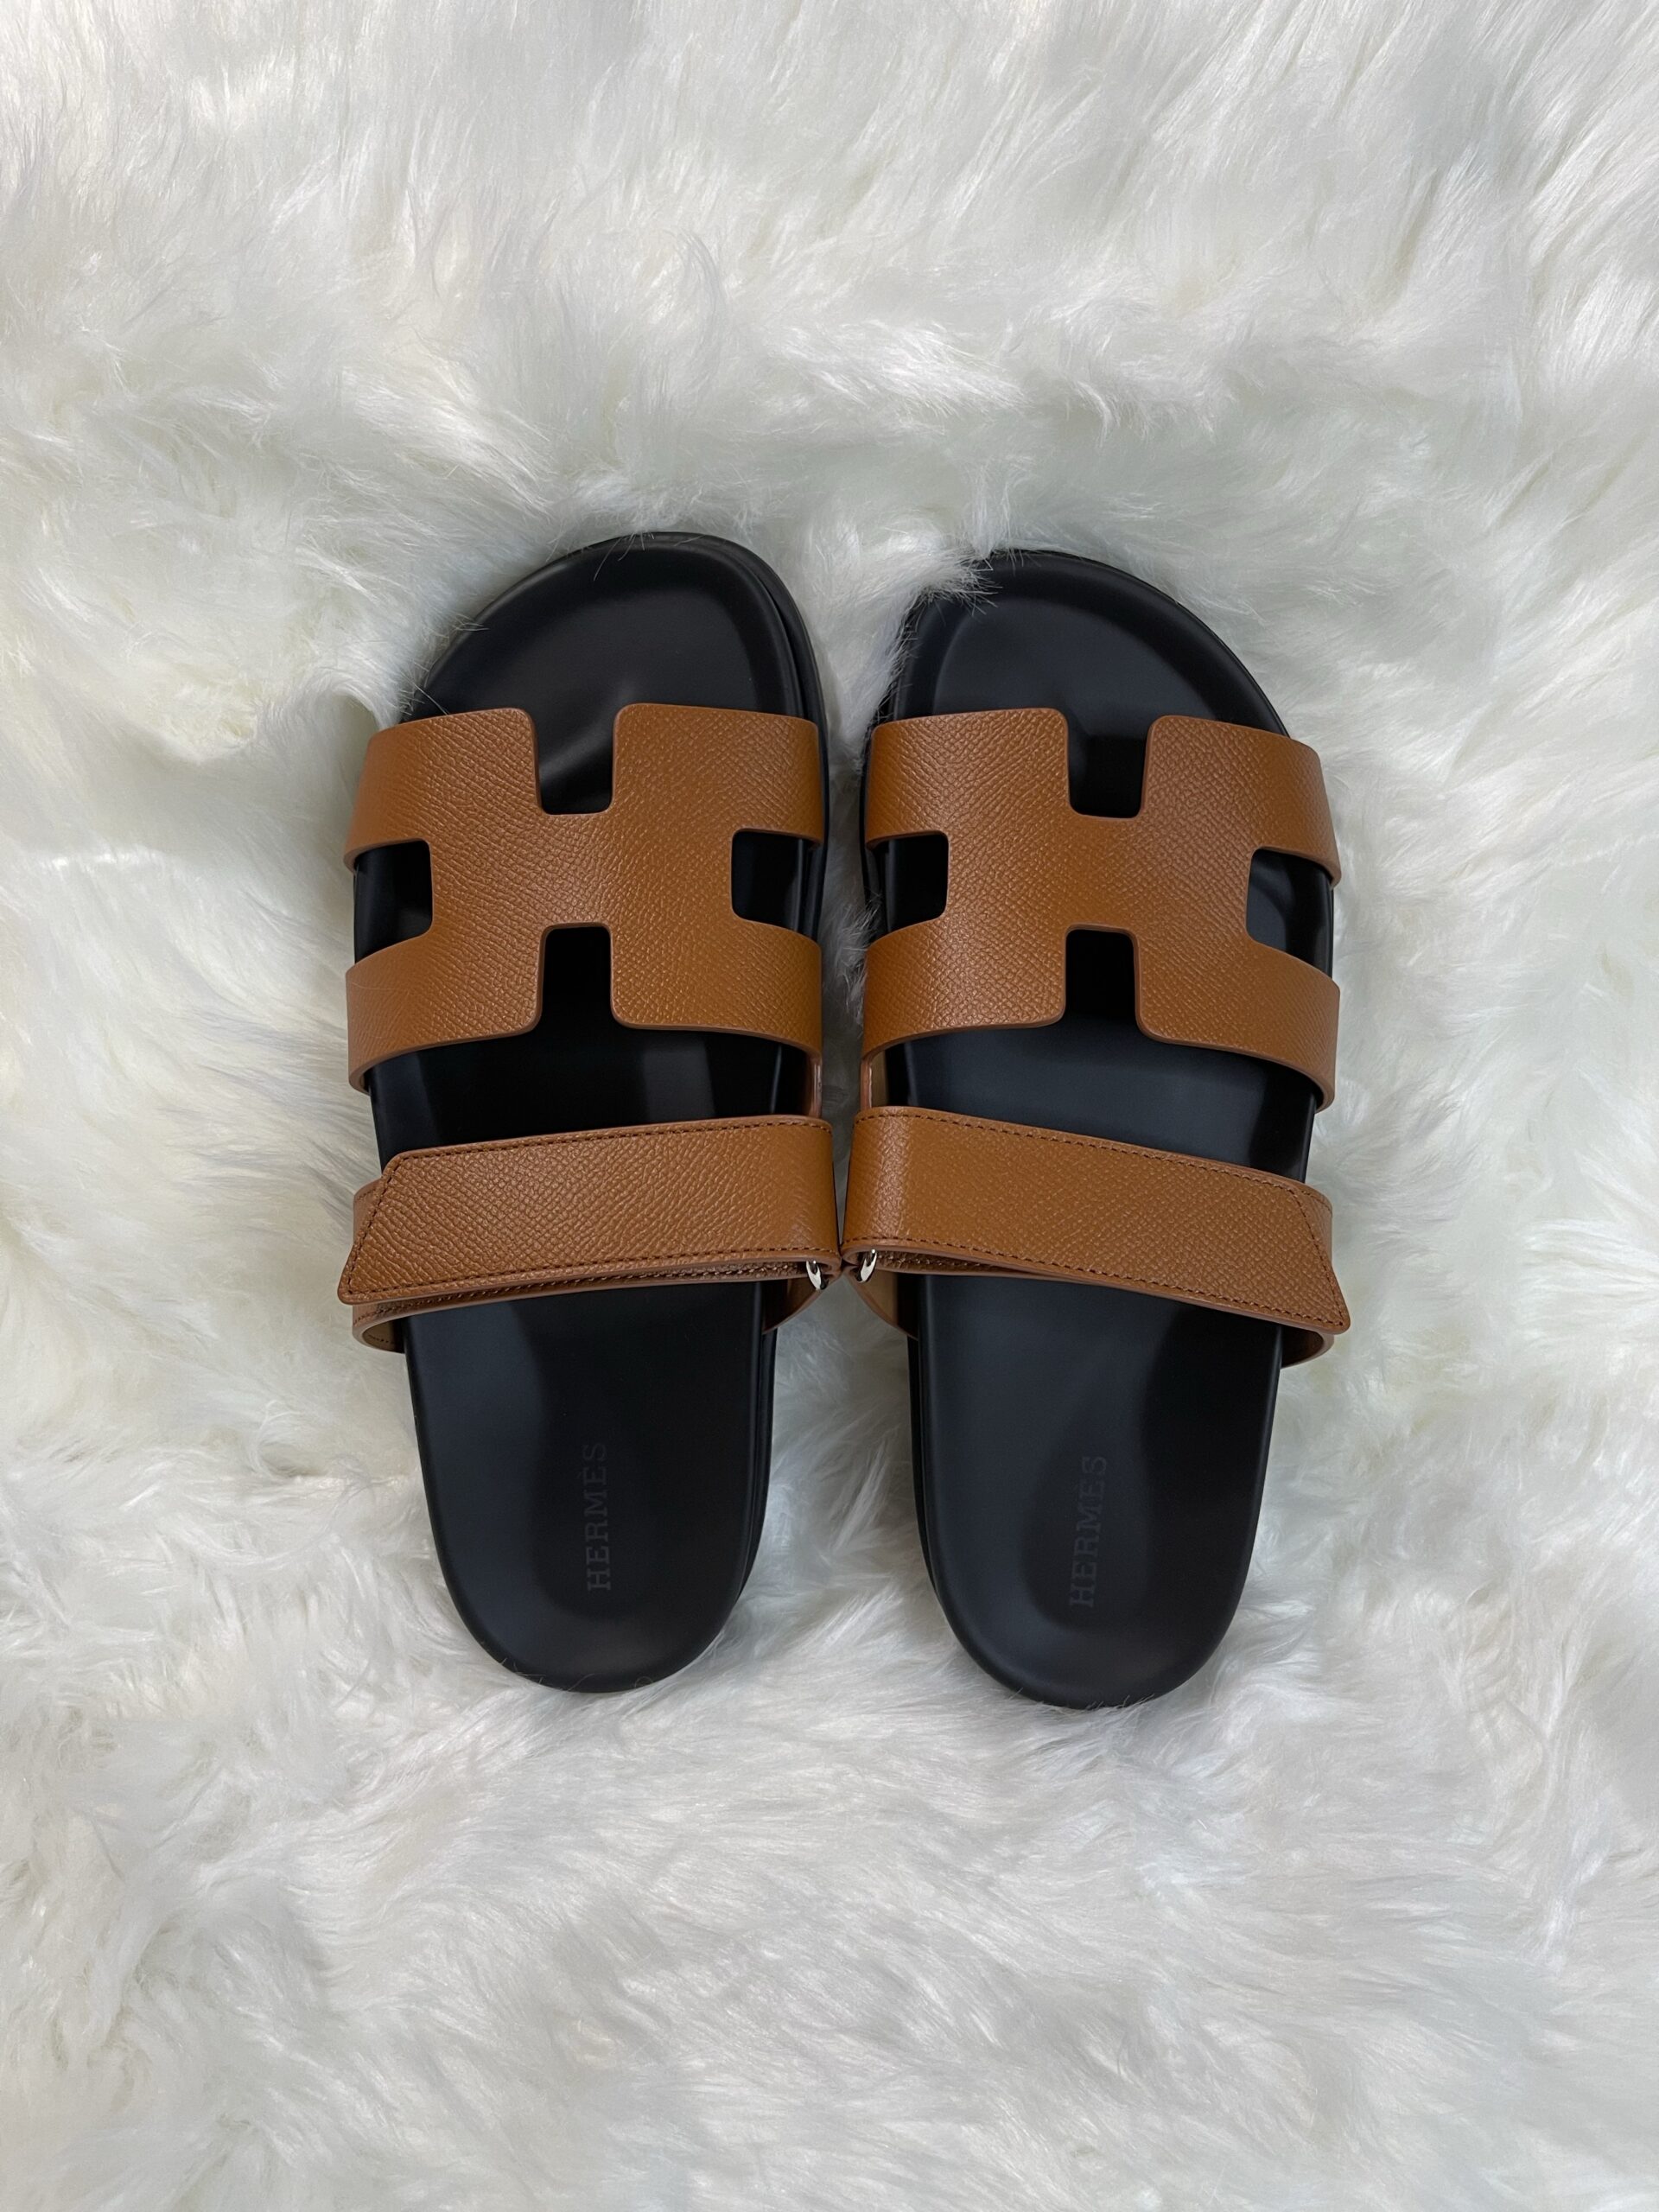 Hermes Chypre Sandals Review - Pros, Cons, Sizing, and Are They Worth It? -  Isabelle Vita New York